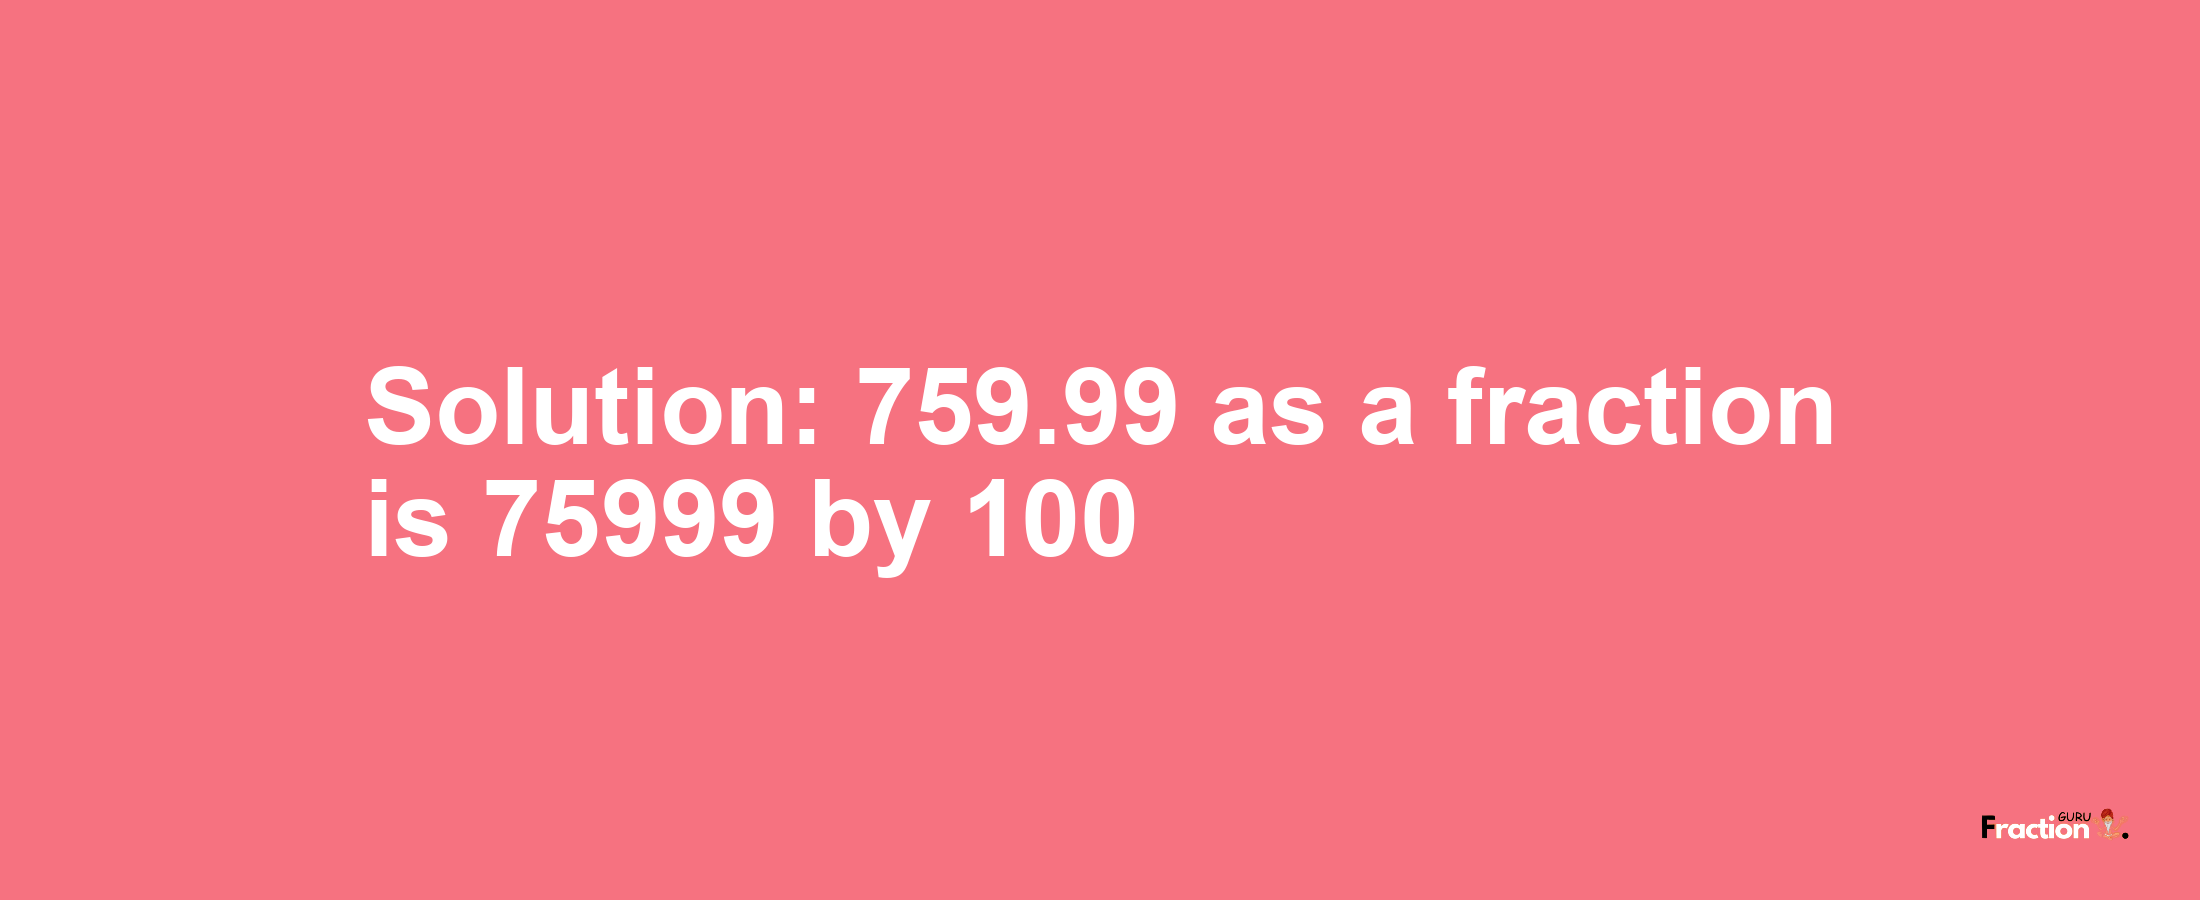 Solution:759.99 as a fraction is 75999/100